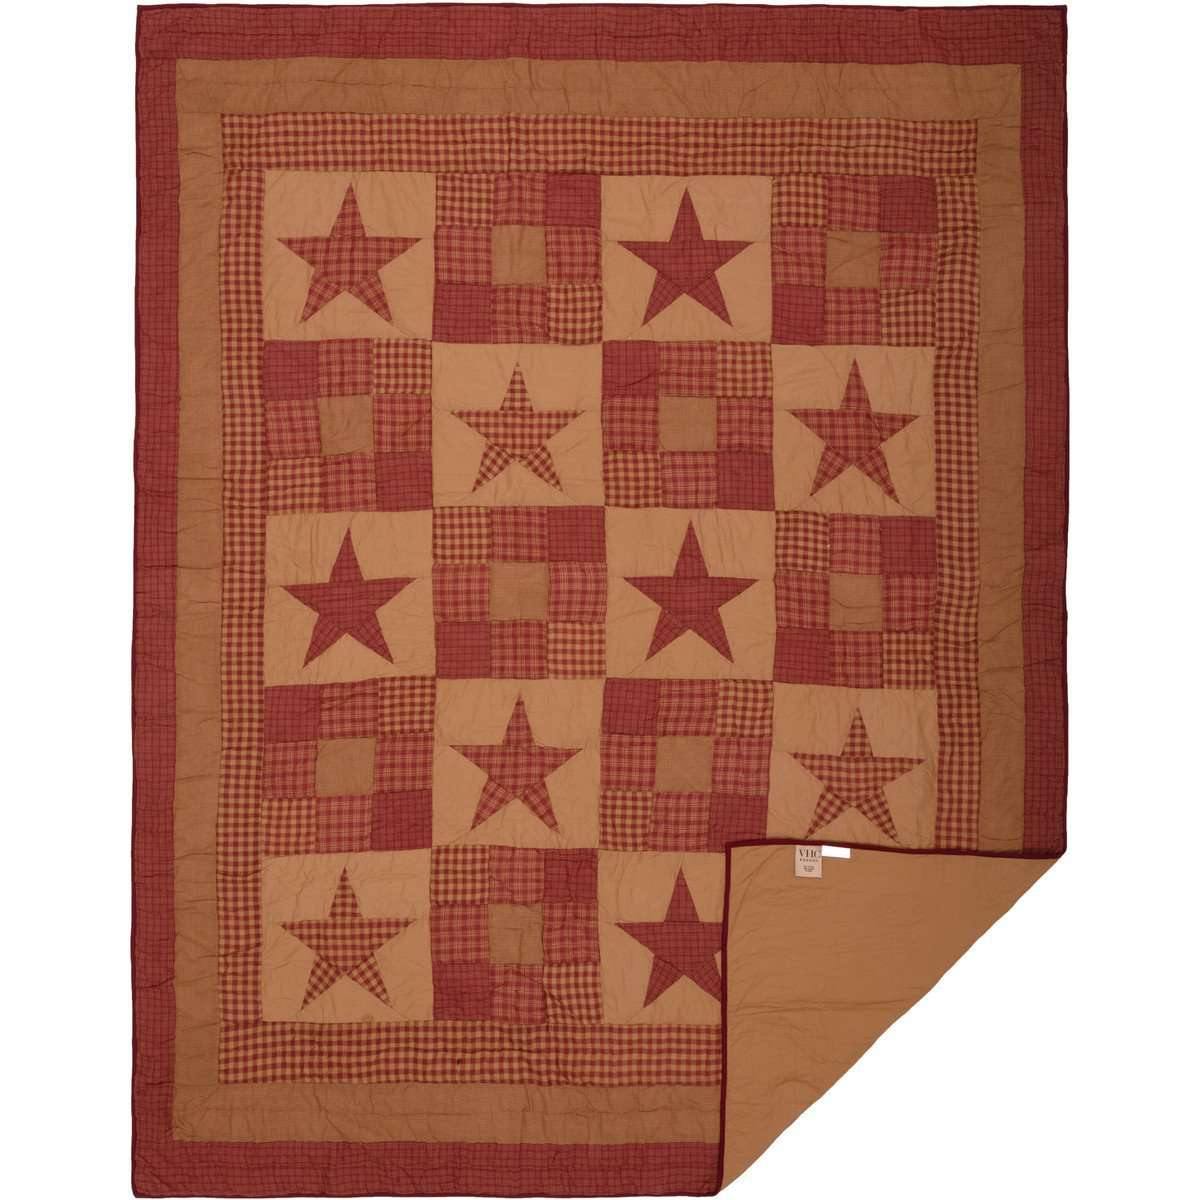 Ninepatch Star Twin Quilt 68Wx86L VHC Brands full